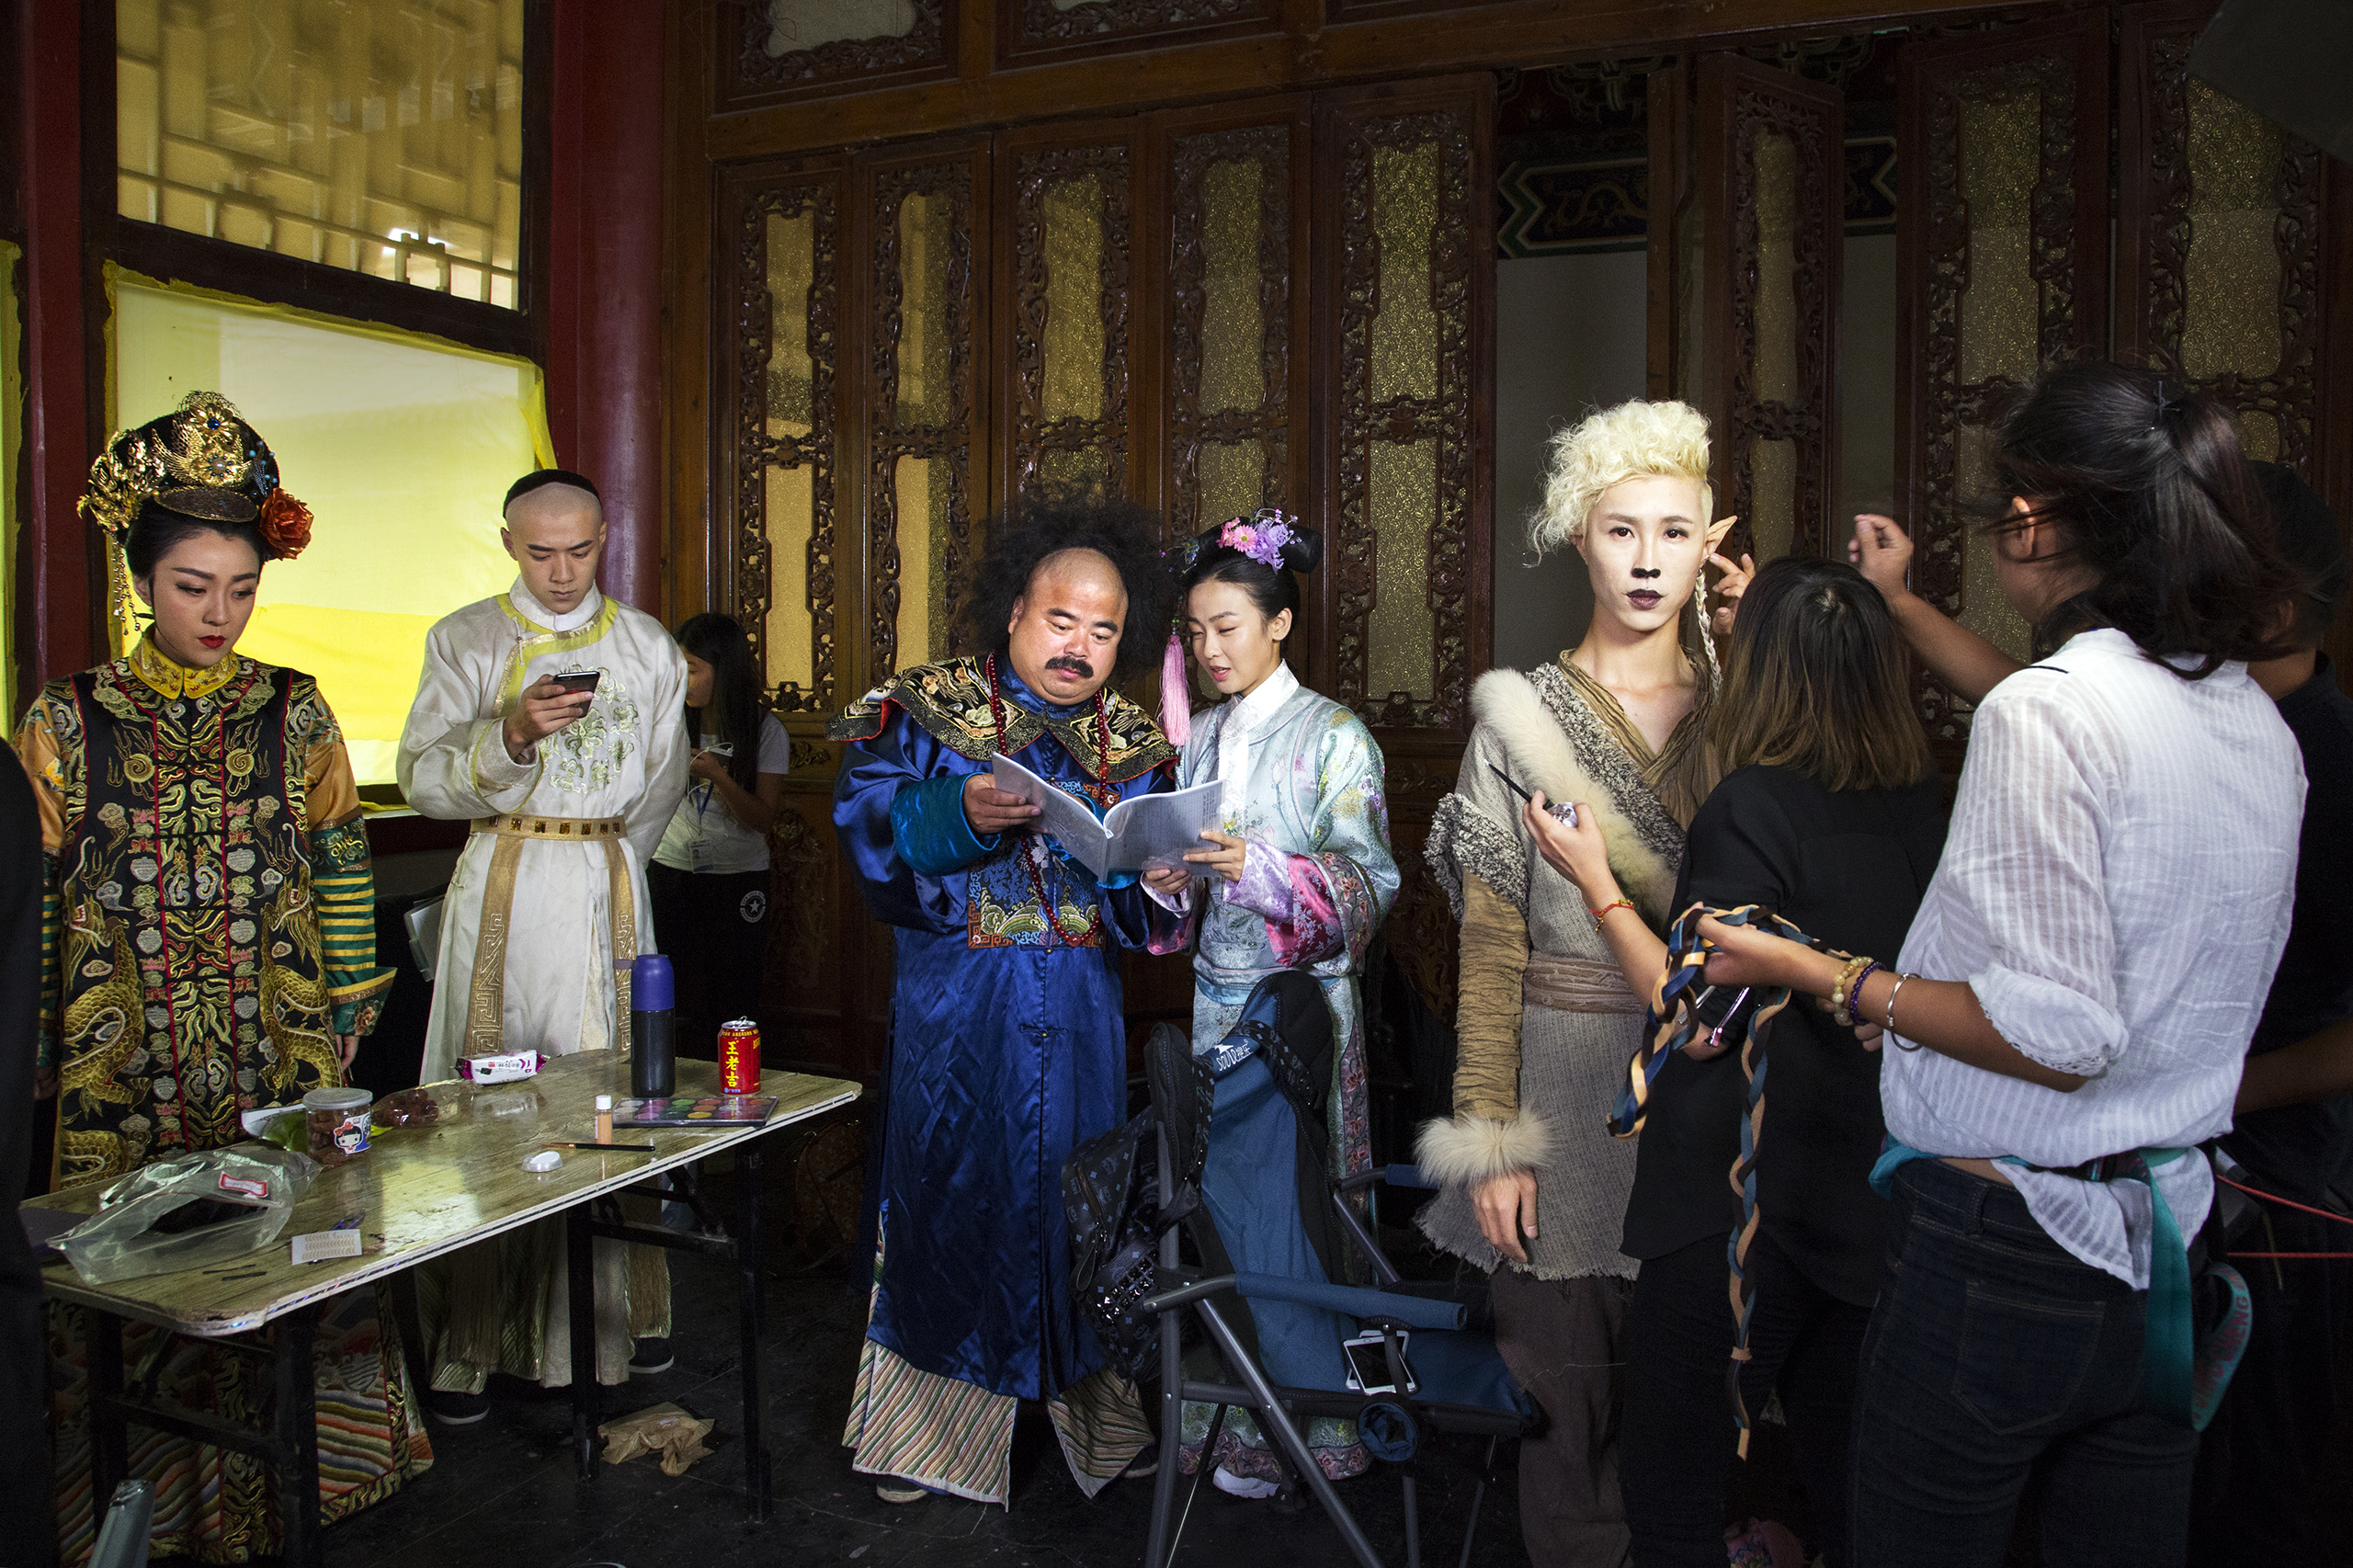 Actors on the set of a costume drama at Hengdian World Studios. China’s box-office revenue is poised to surpass Hollywood’s in the next few years. (Liz Hingley for TIME)